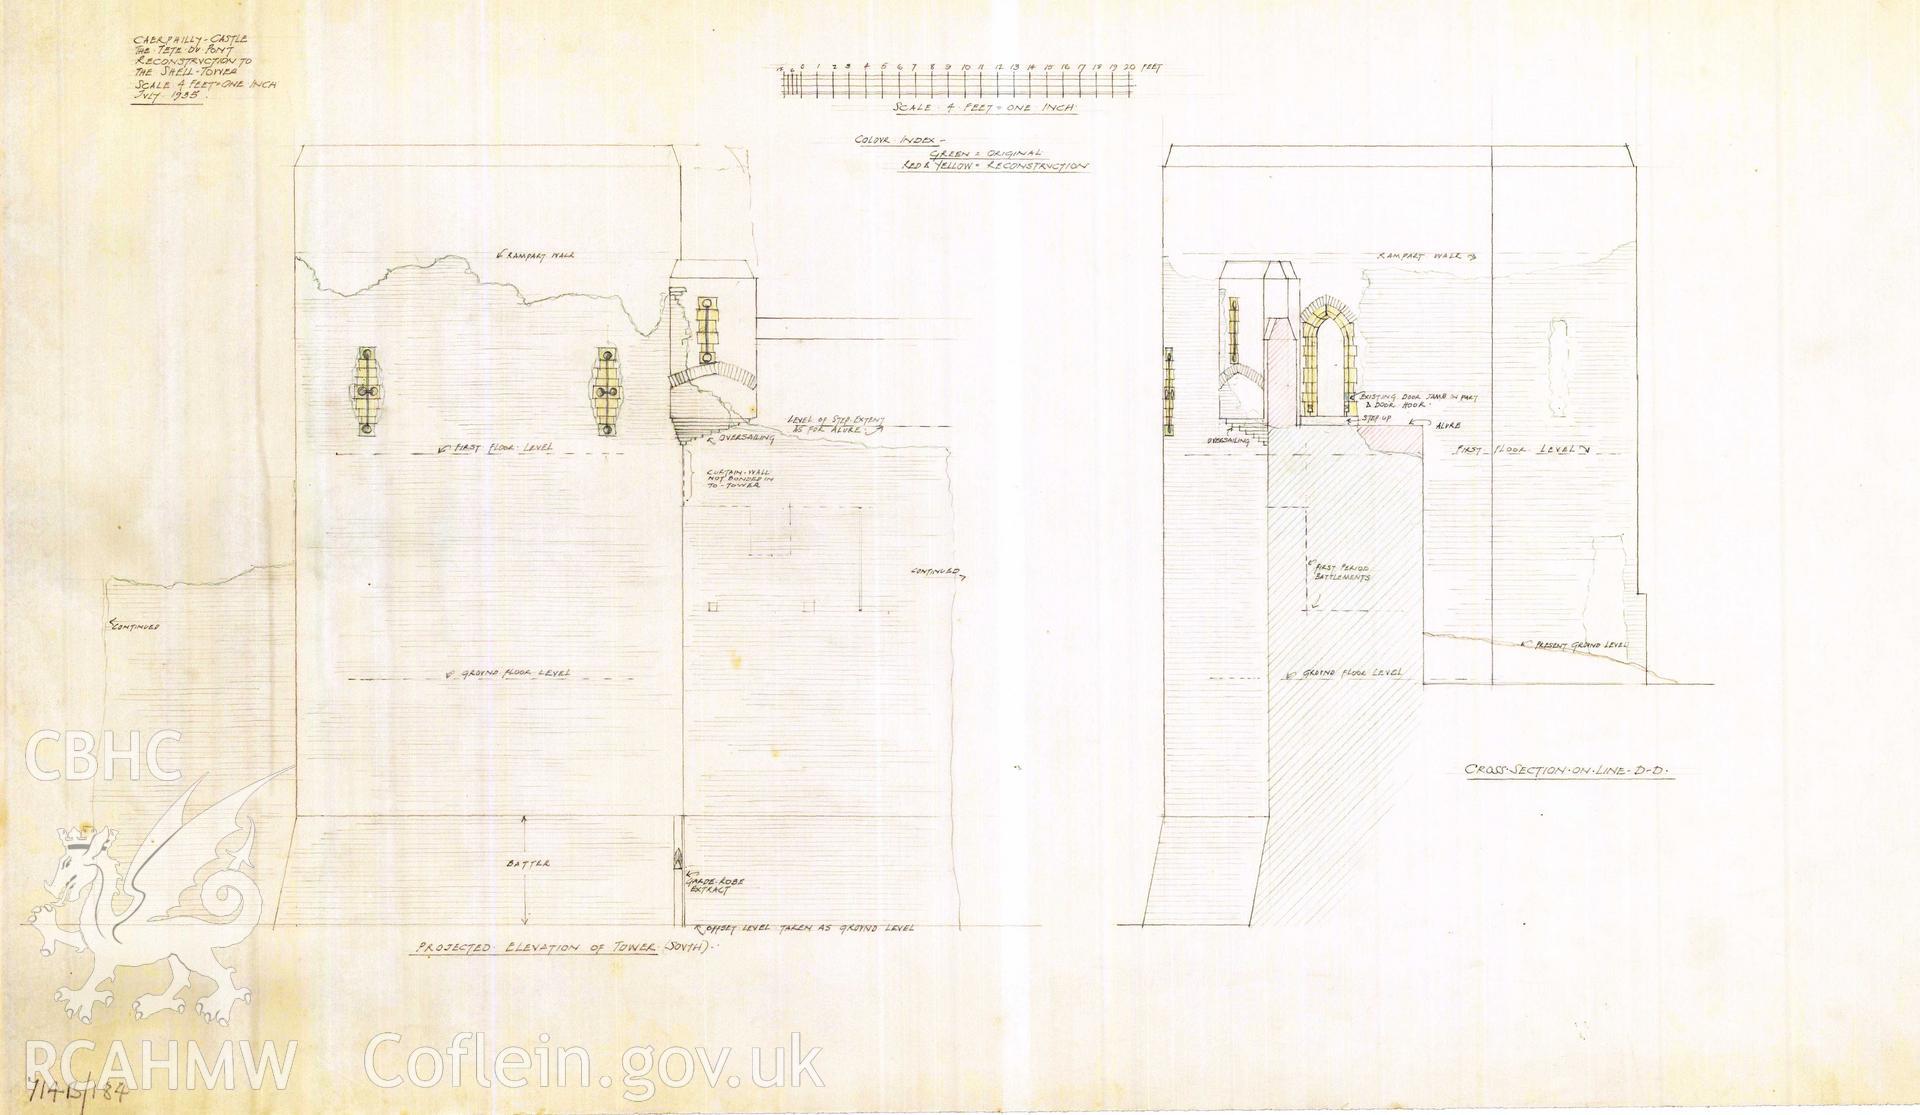 Cadw guardianship monument drawing of Caerphilly Castle. Elevation and section showing reconstruction to shell tower. Cadw Ref. No. 714B/184. Scale 1:48.